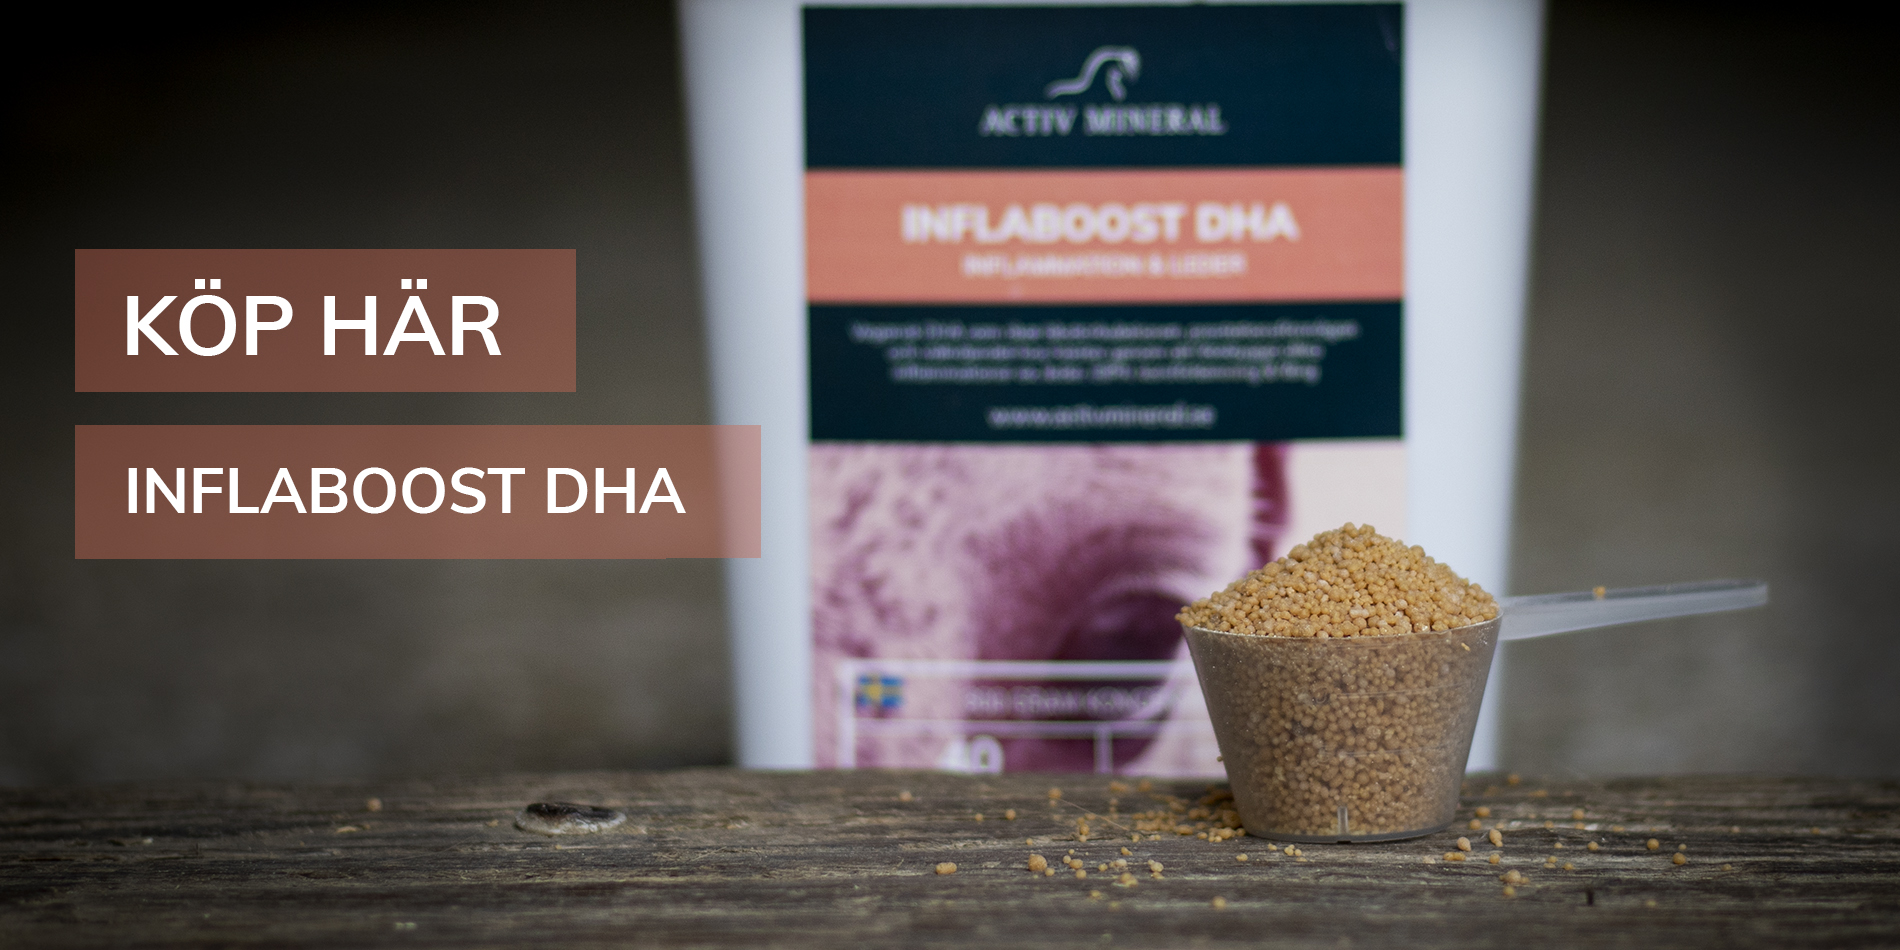 Inflaboost DHA